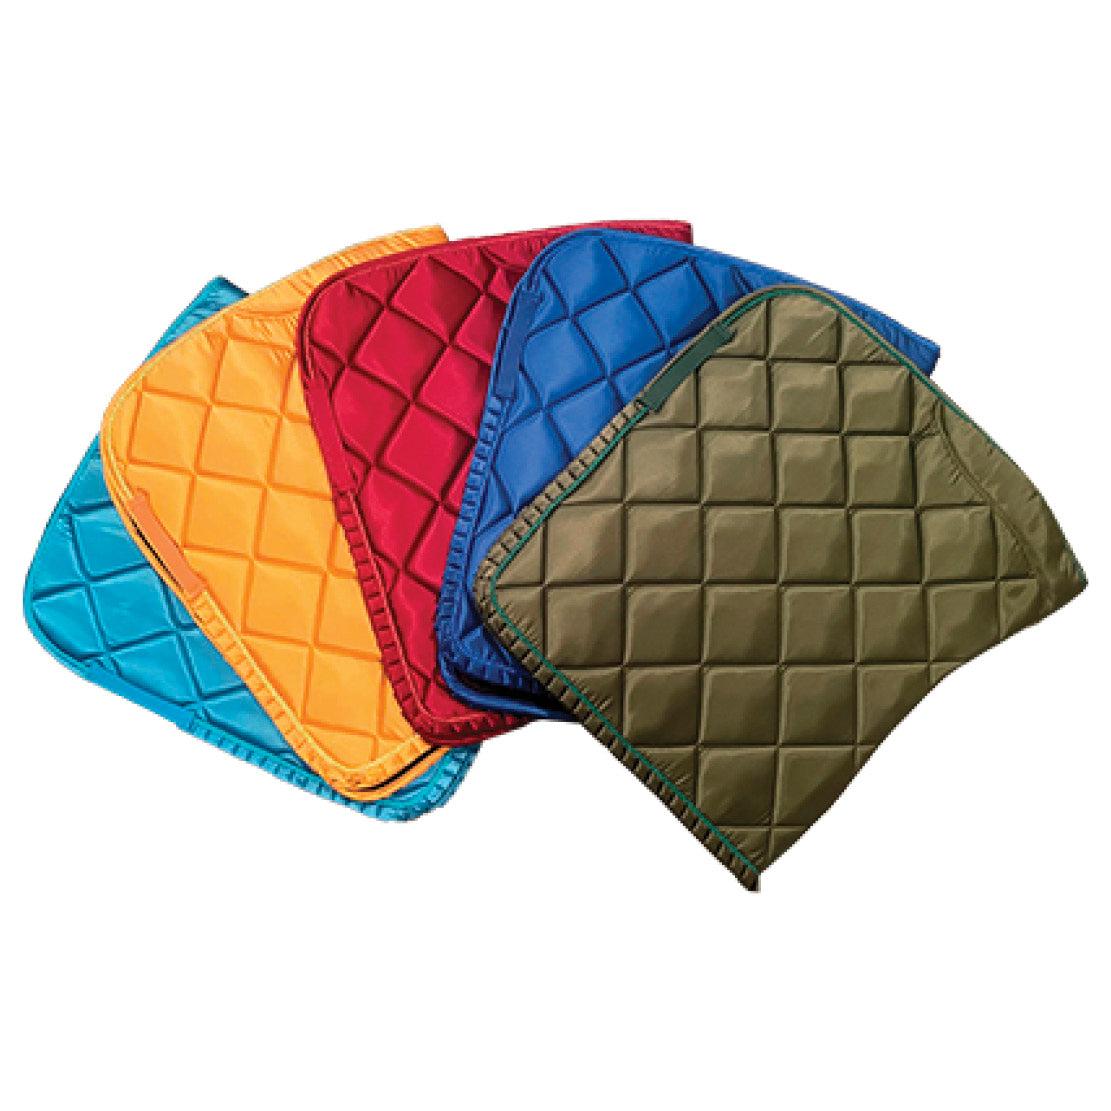 Jumping pads all colors